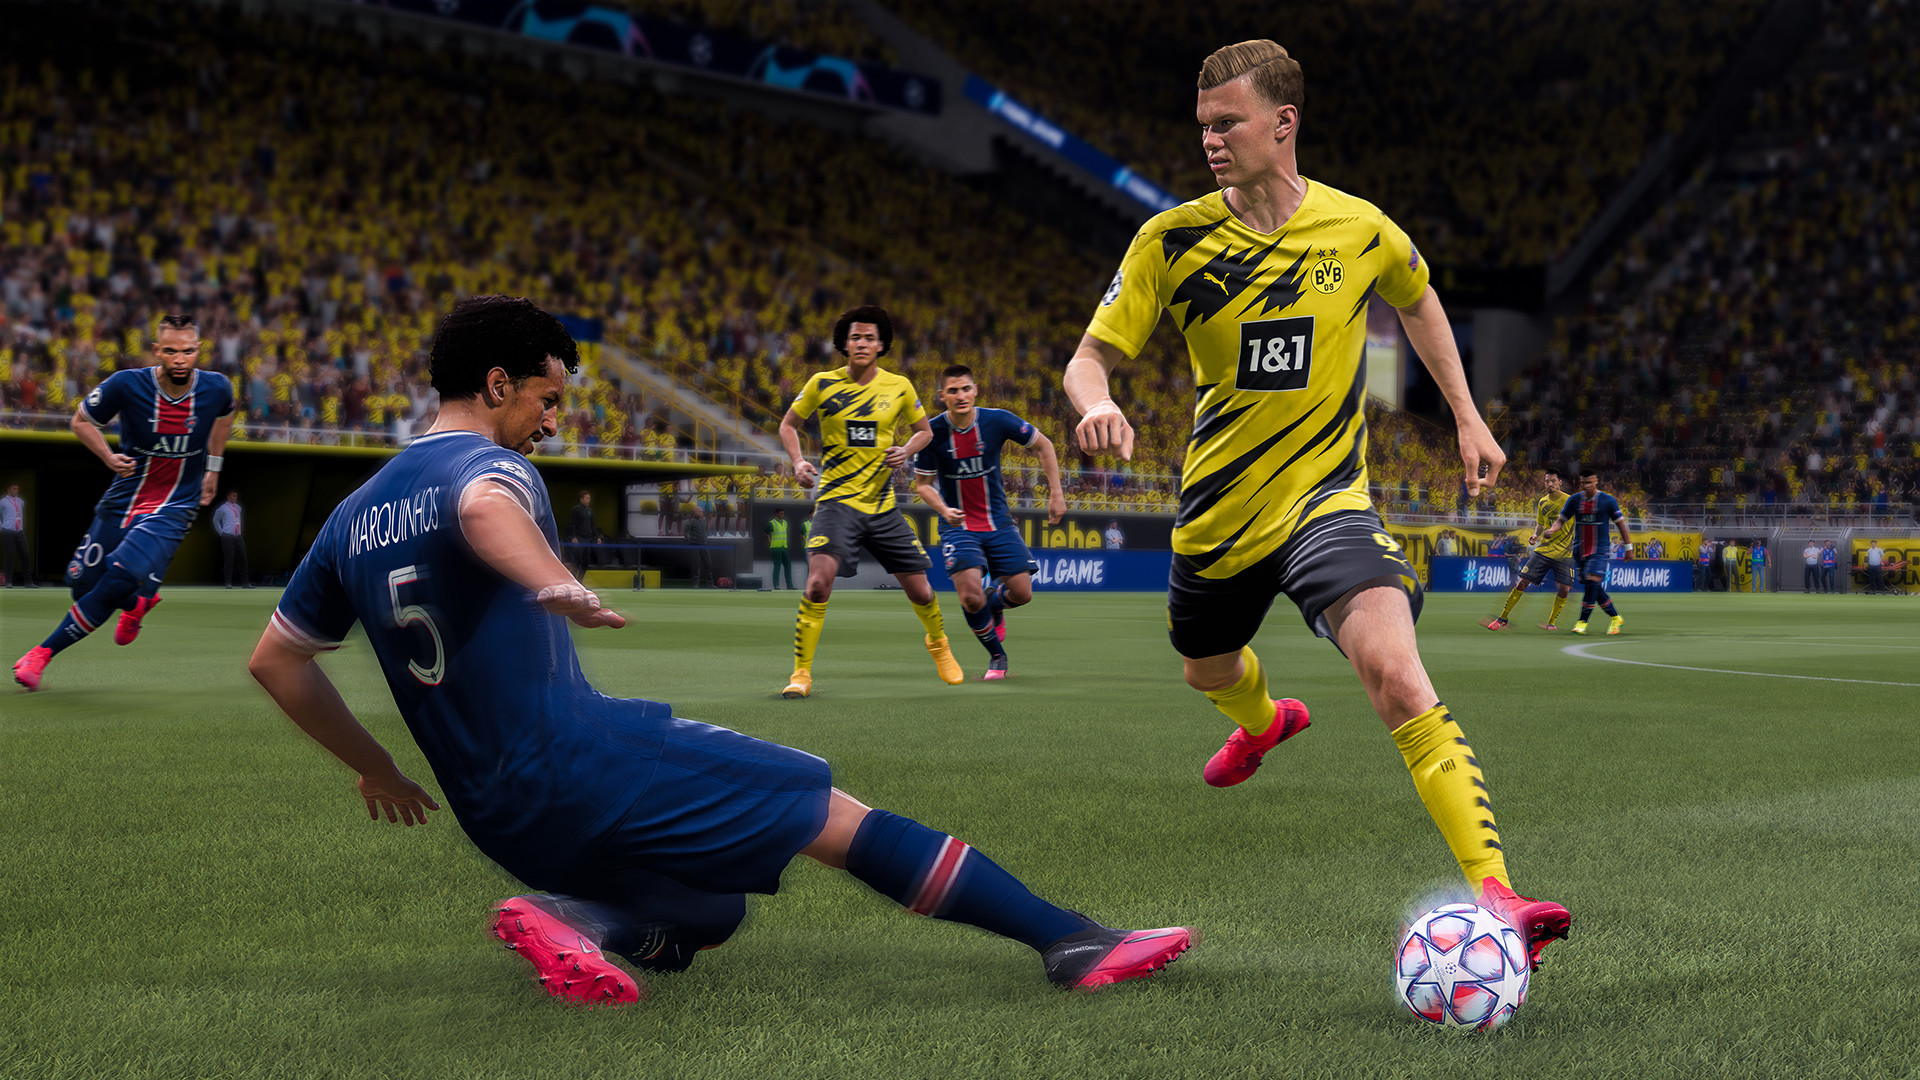 Fifa 21 Free Ps5 And Xbox Series X S Update Has Begun Rolling Out